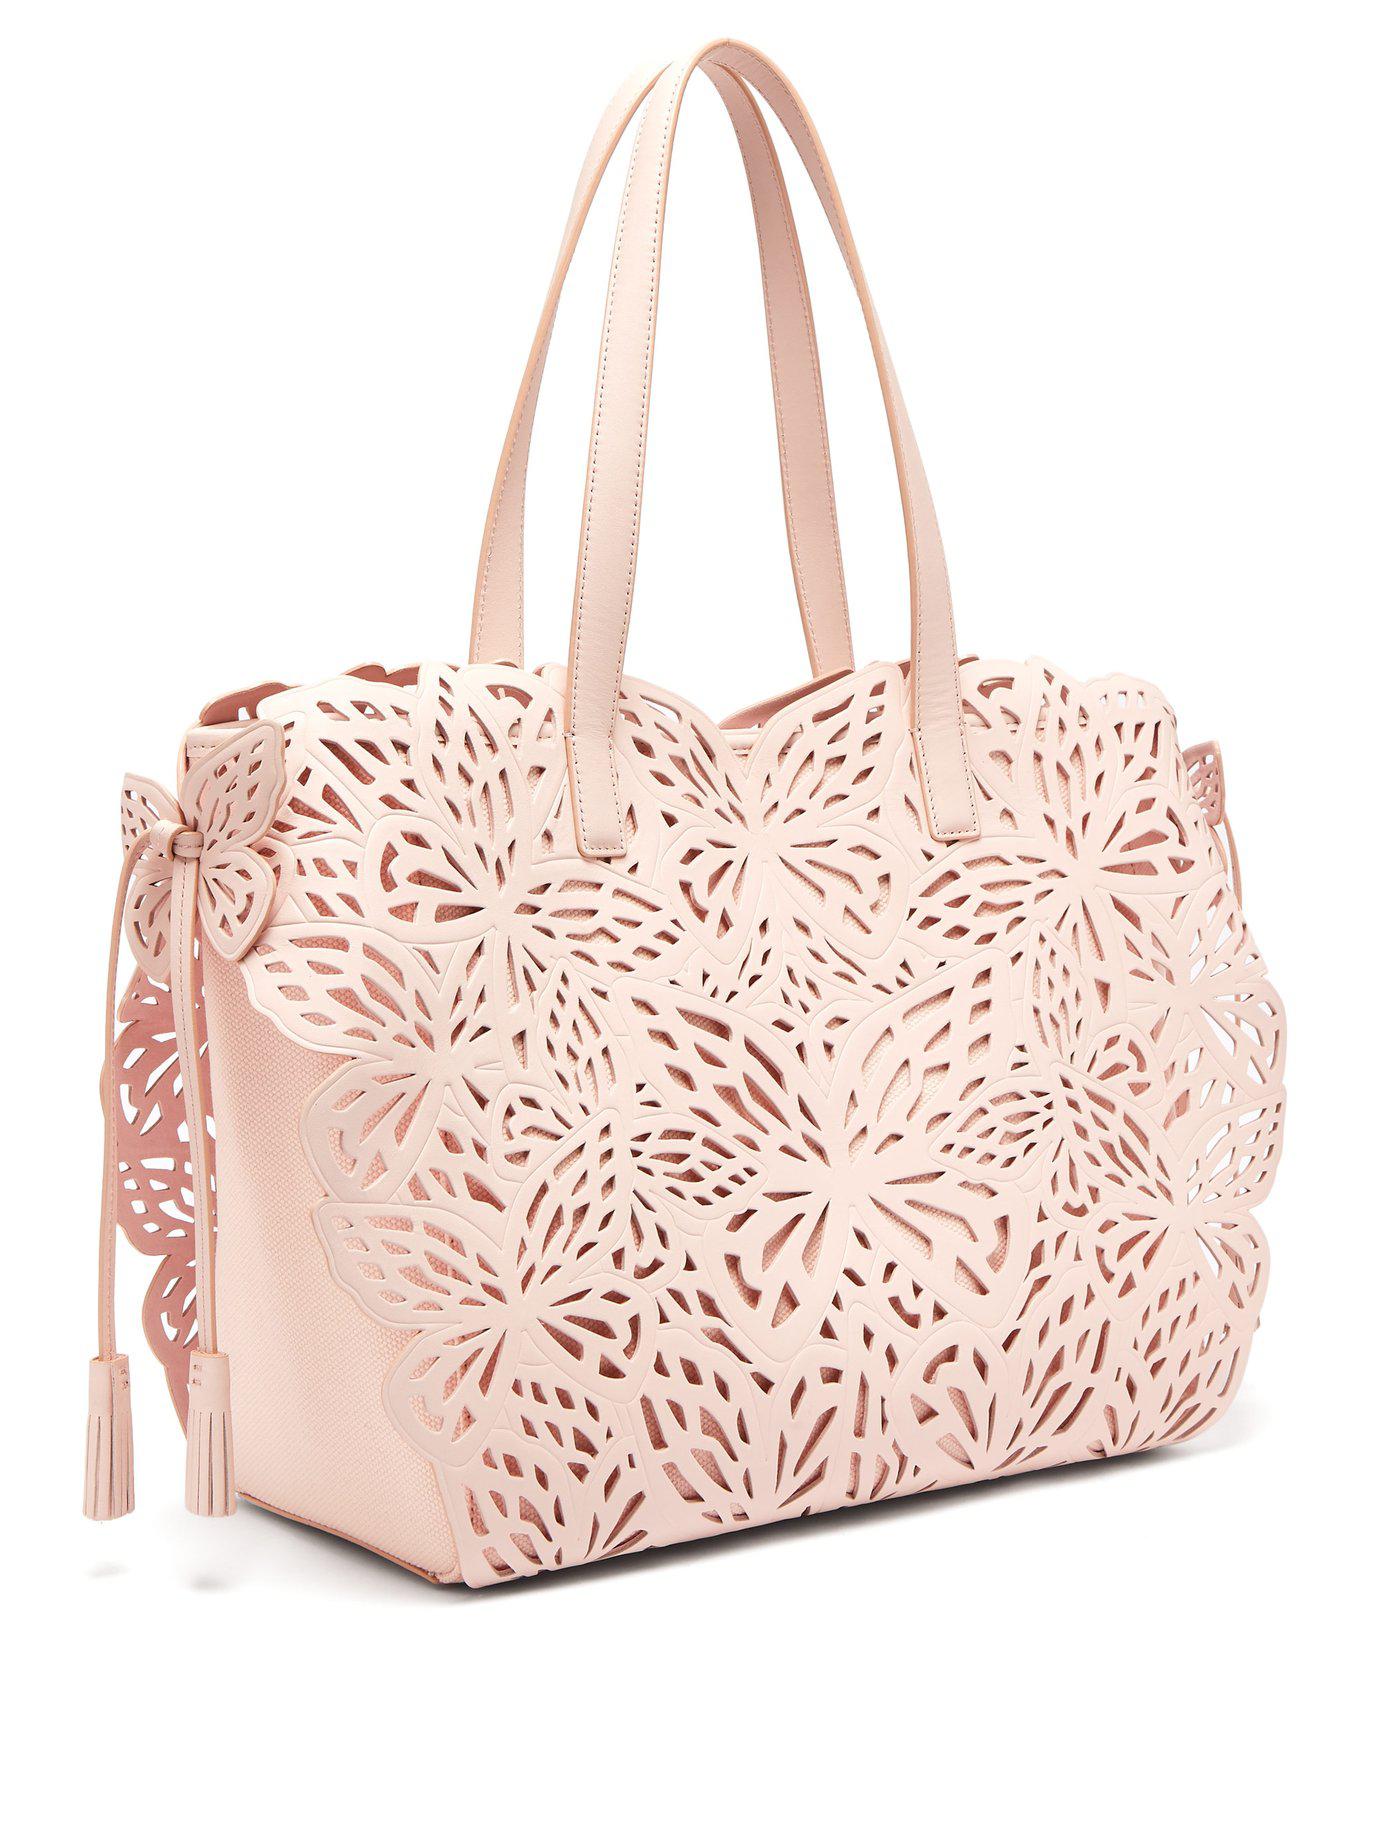 Sophia Webster Liara Butterfly Leather Tote in Light Pink (Pink 